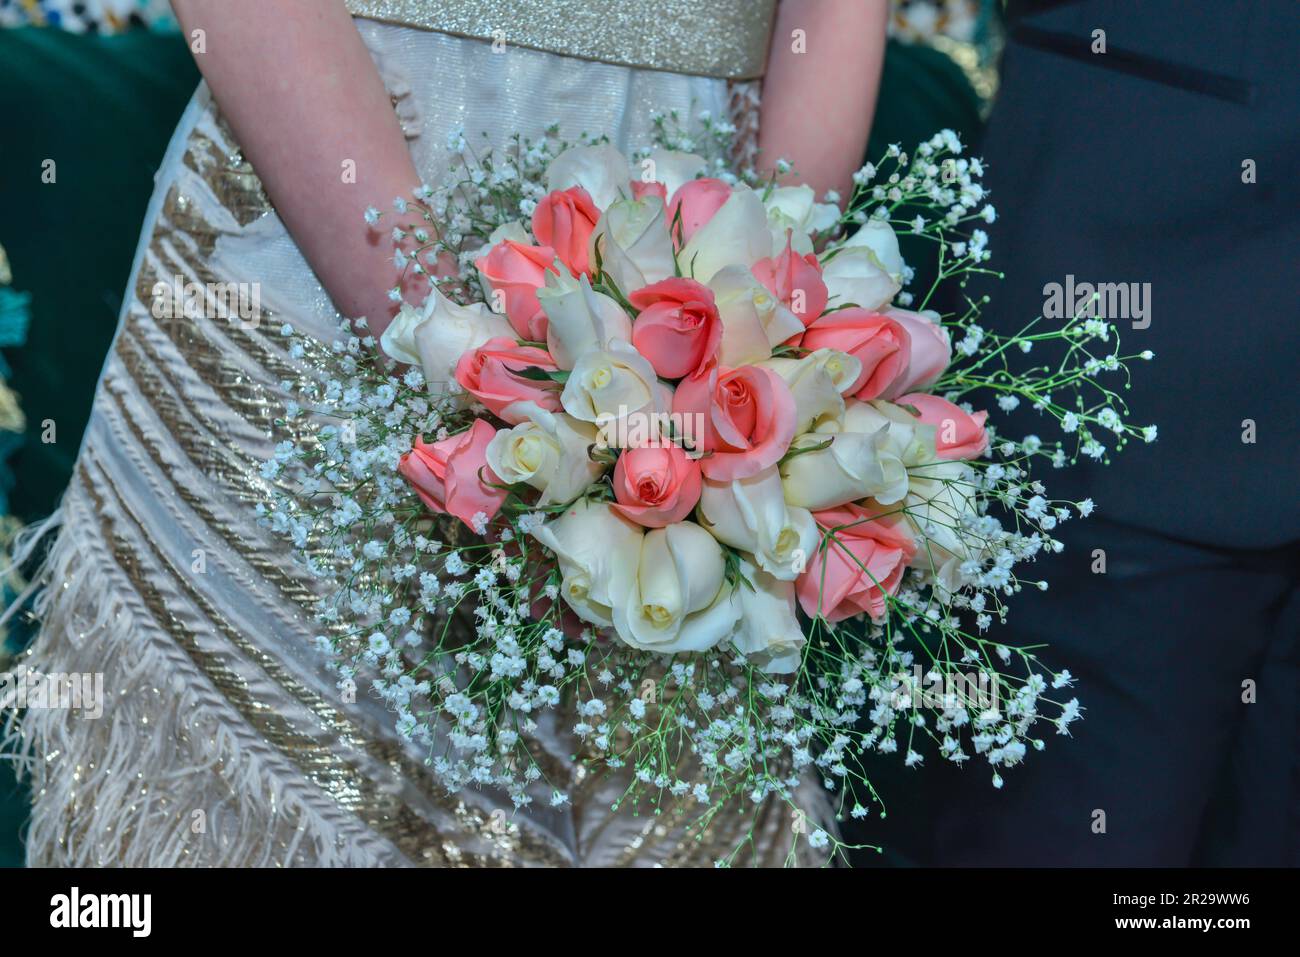 Arab bride holding a bouquet of roses Stock Photo